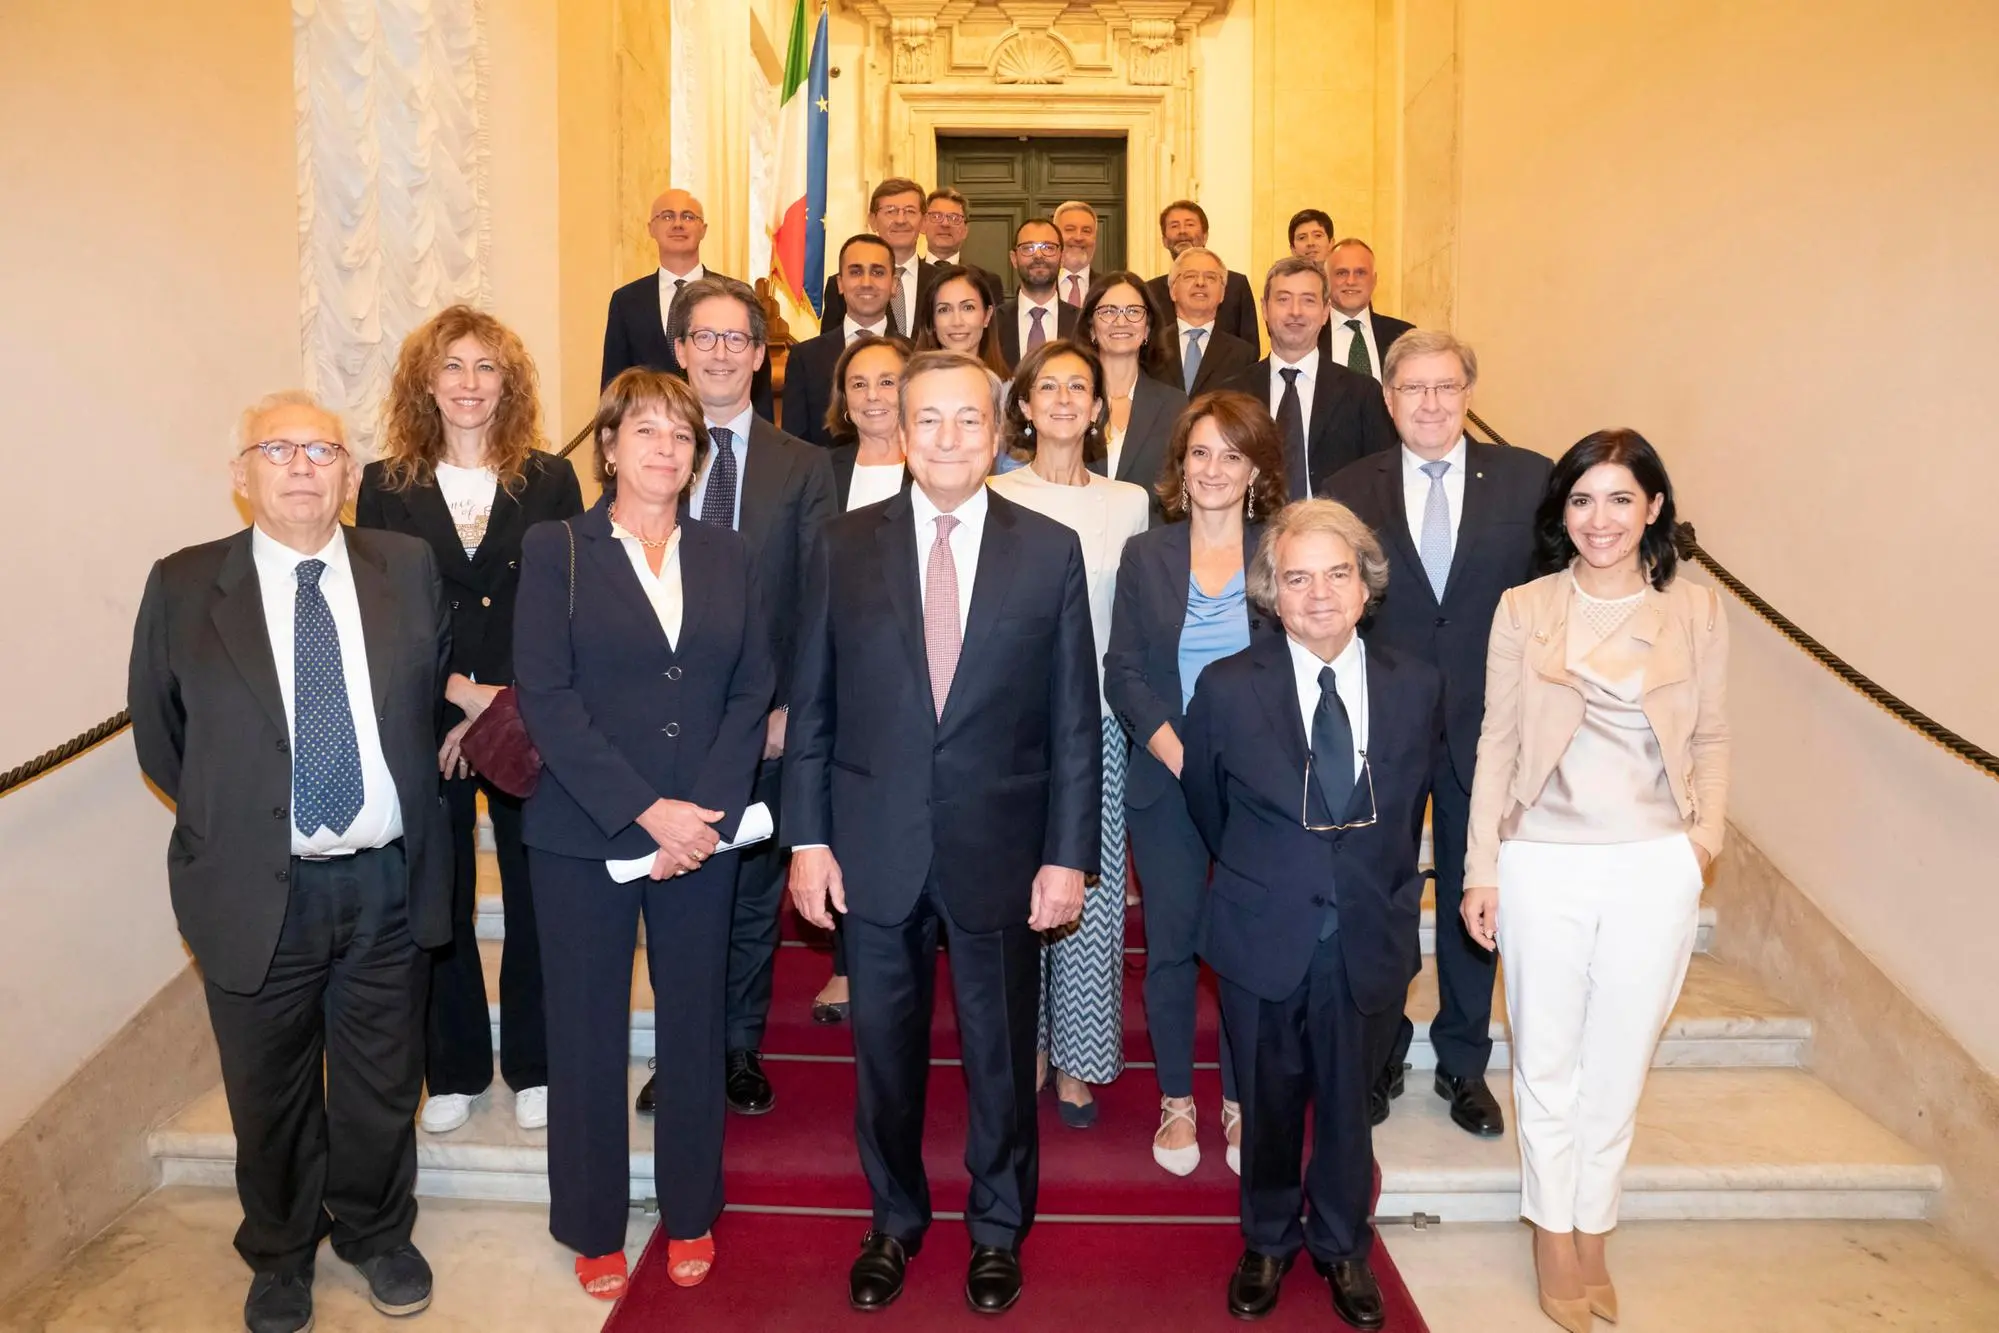 Group photo in the latest cdm of the Draghi government (Ansa)